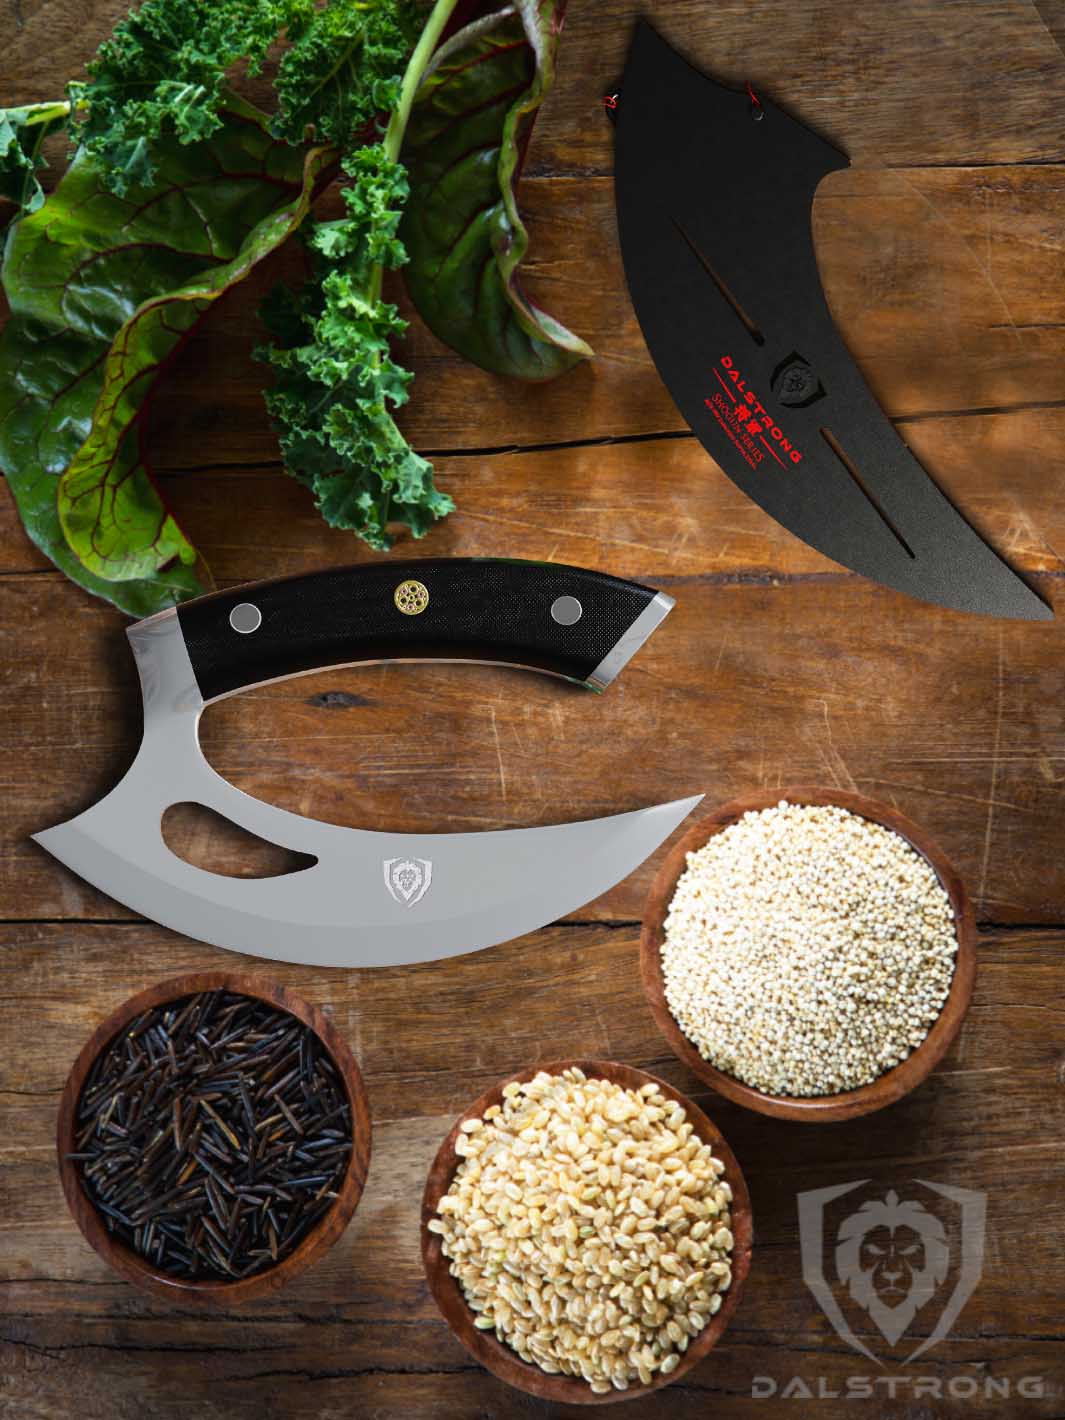 Dalstrong shogun series 6 inch ulu knife with black handle and sheath on a wooden table.